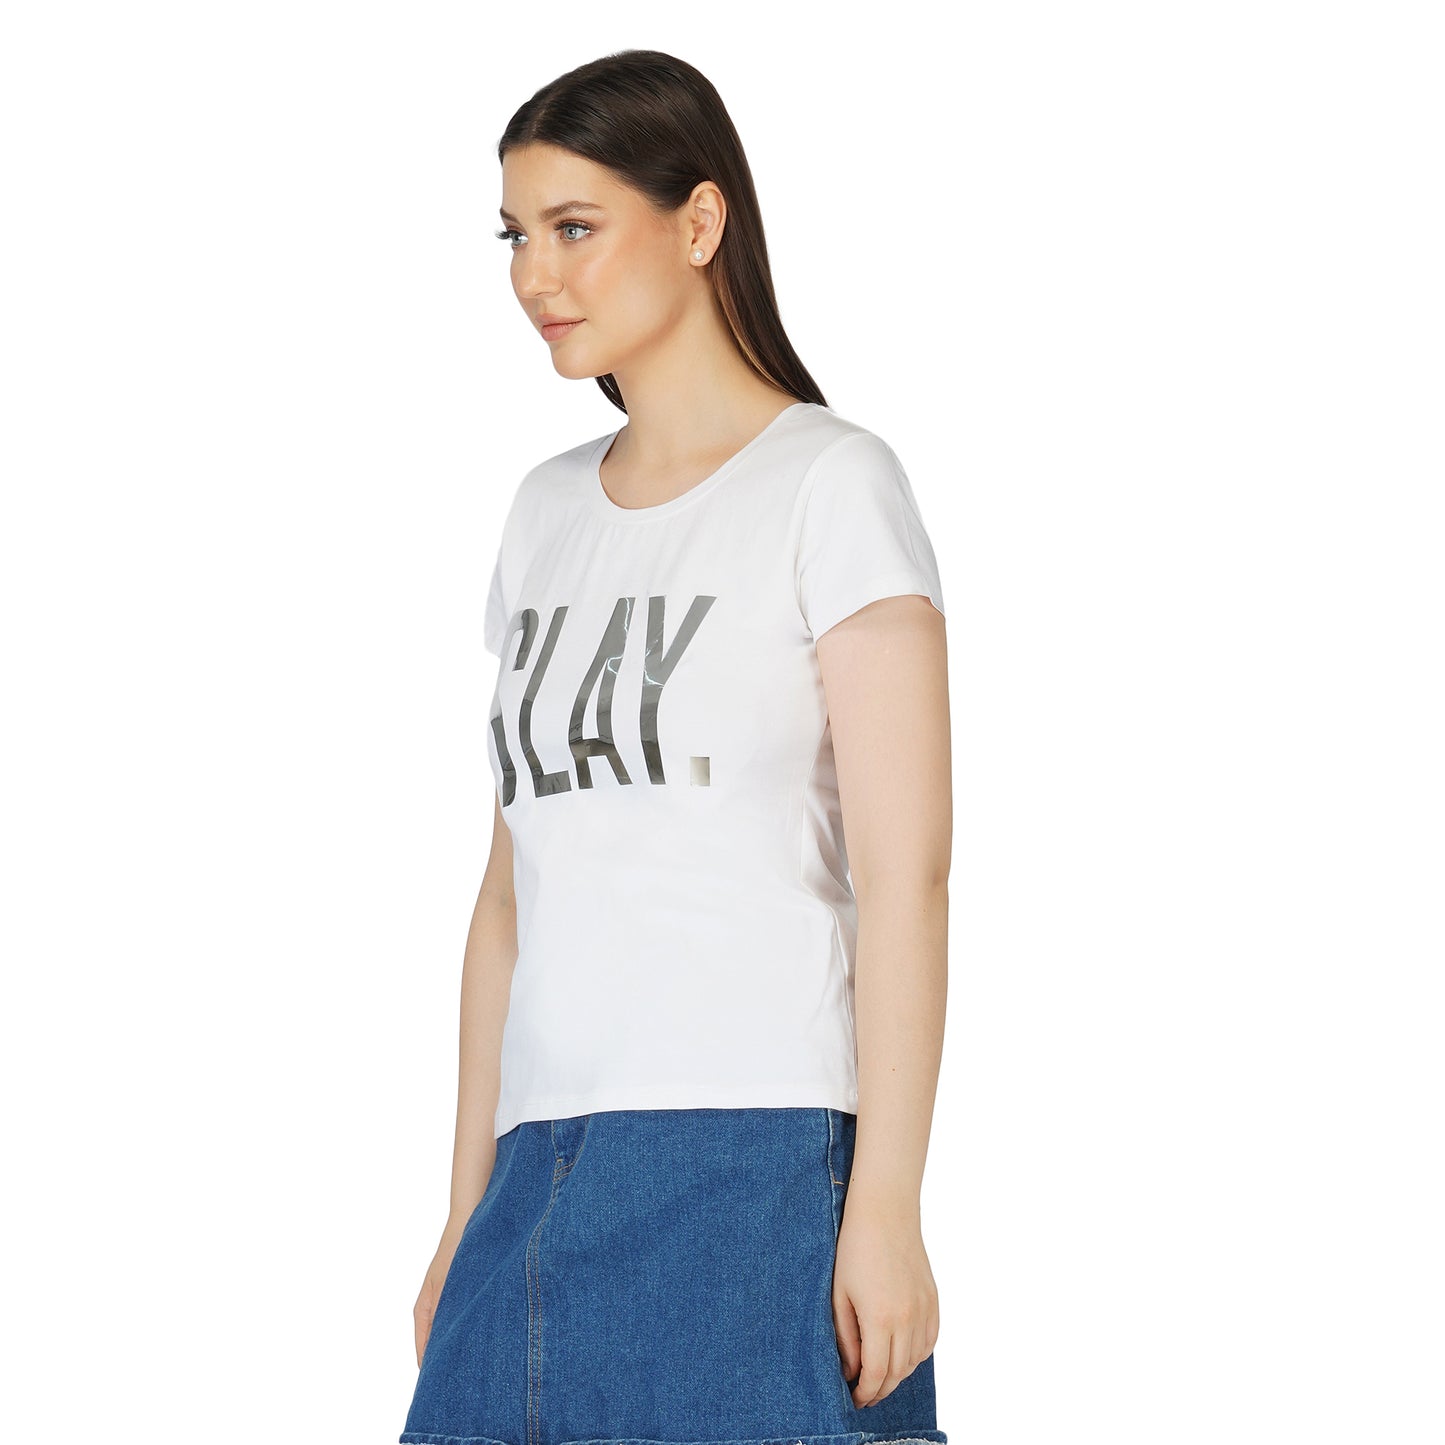 SLAY. Women's Limited Edition Silver Foil Printed T-shirt Reflective Print